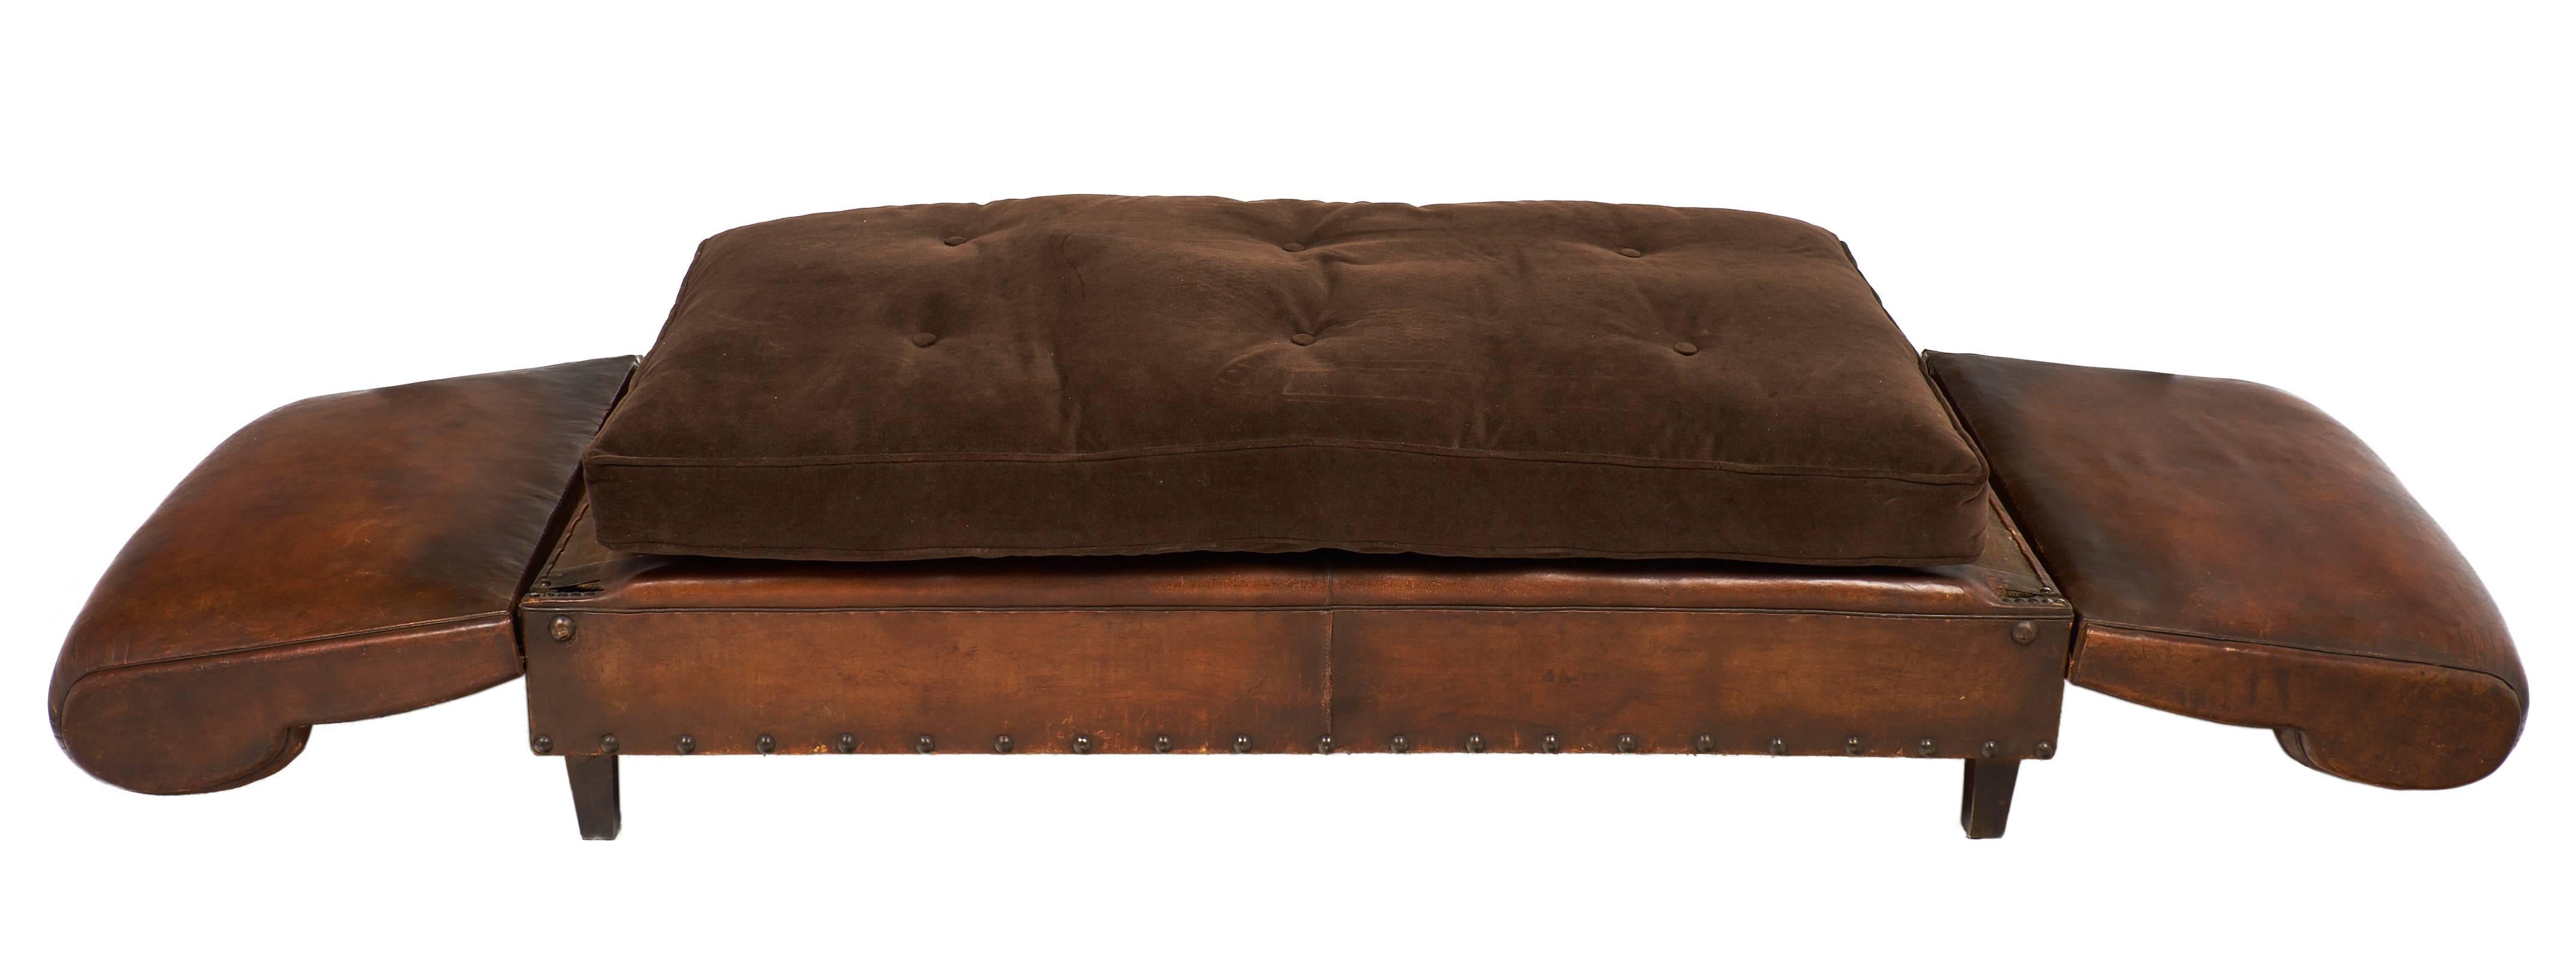 Mid-20th Century French 1930 Art Deco Leather Banquette